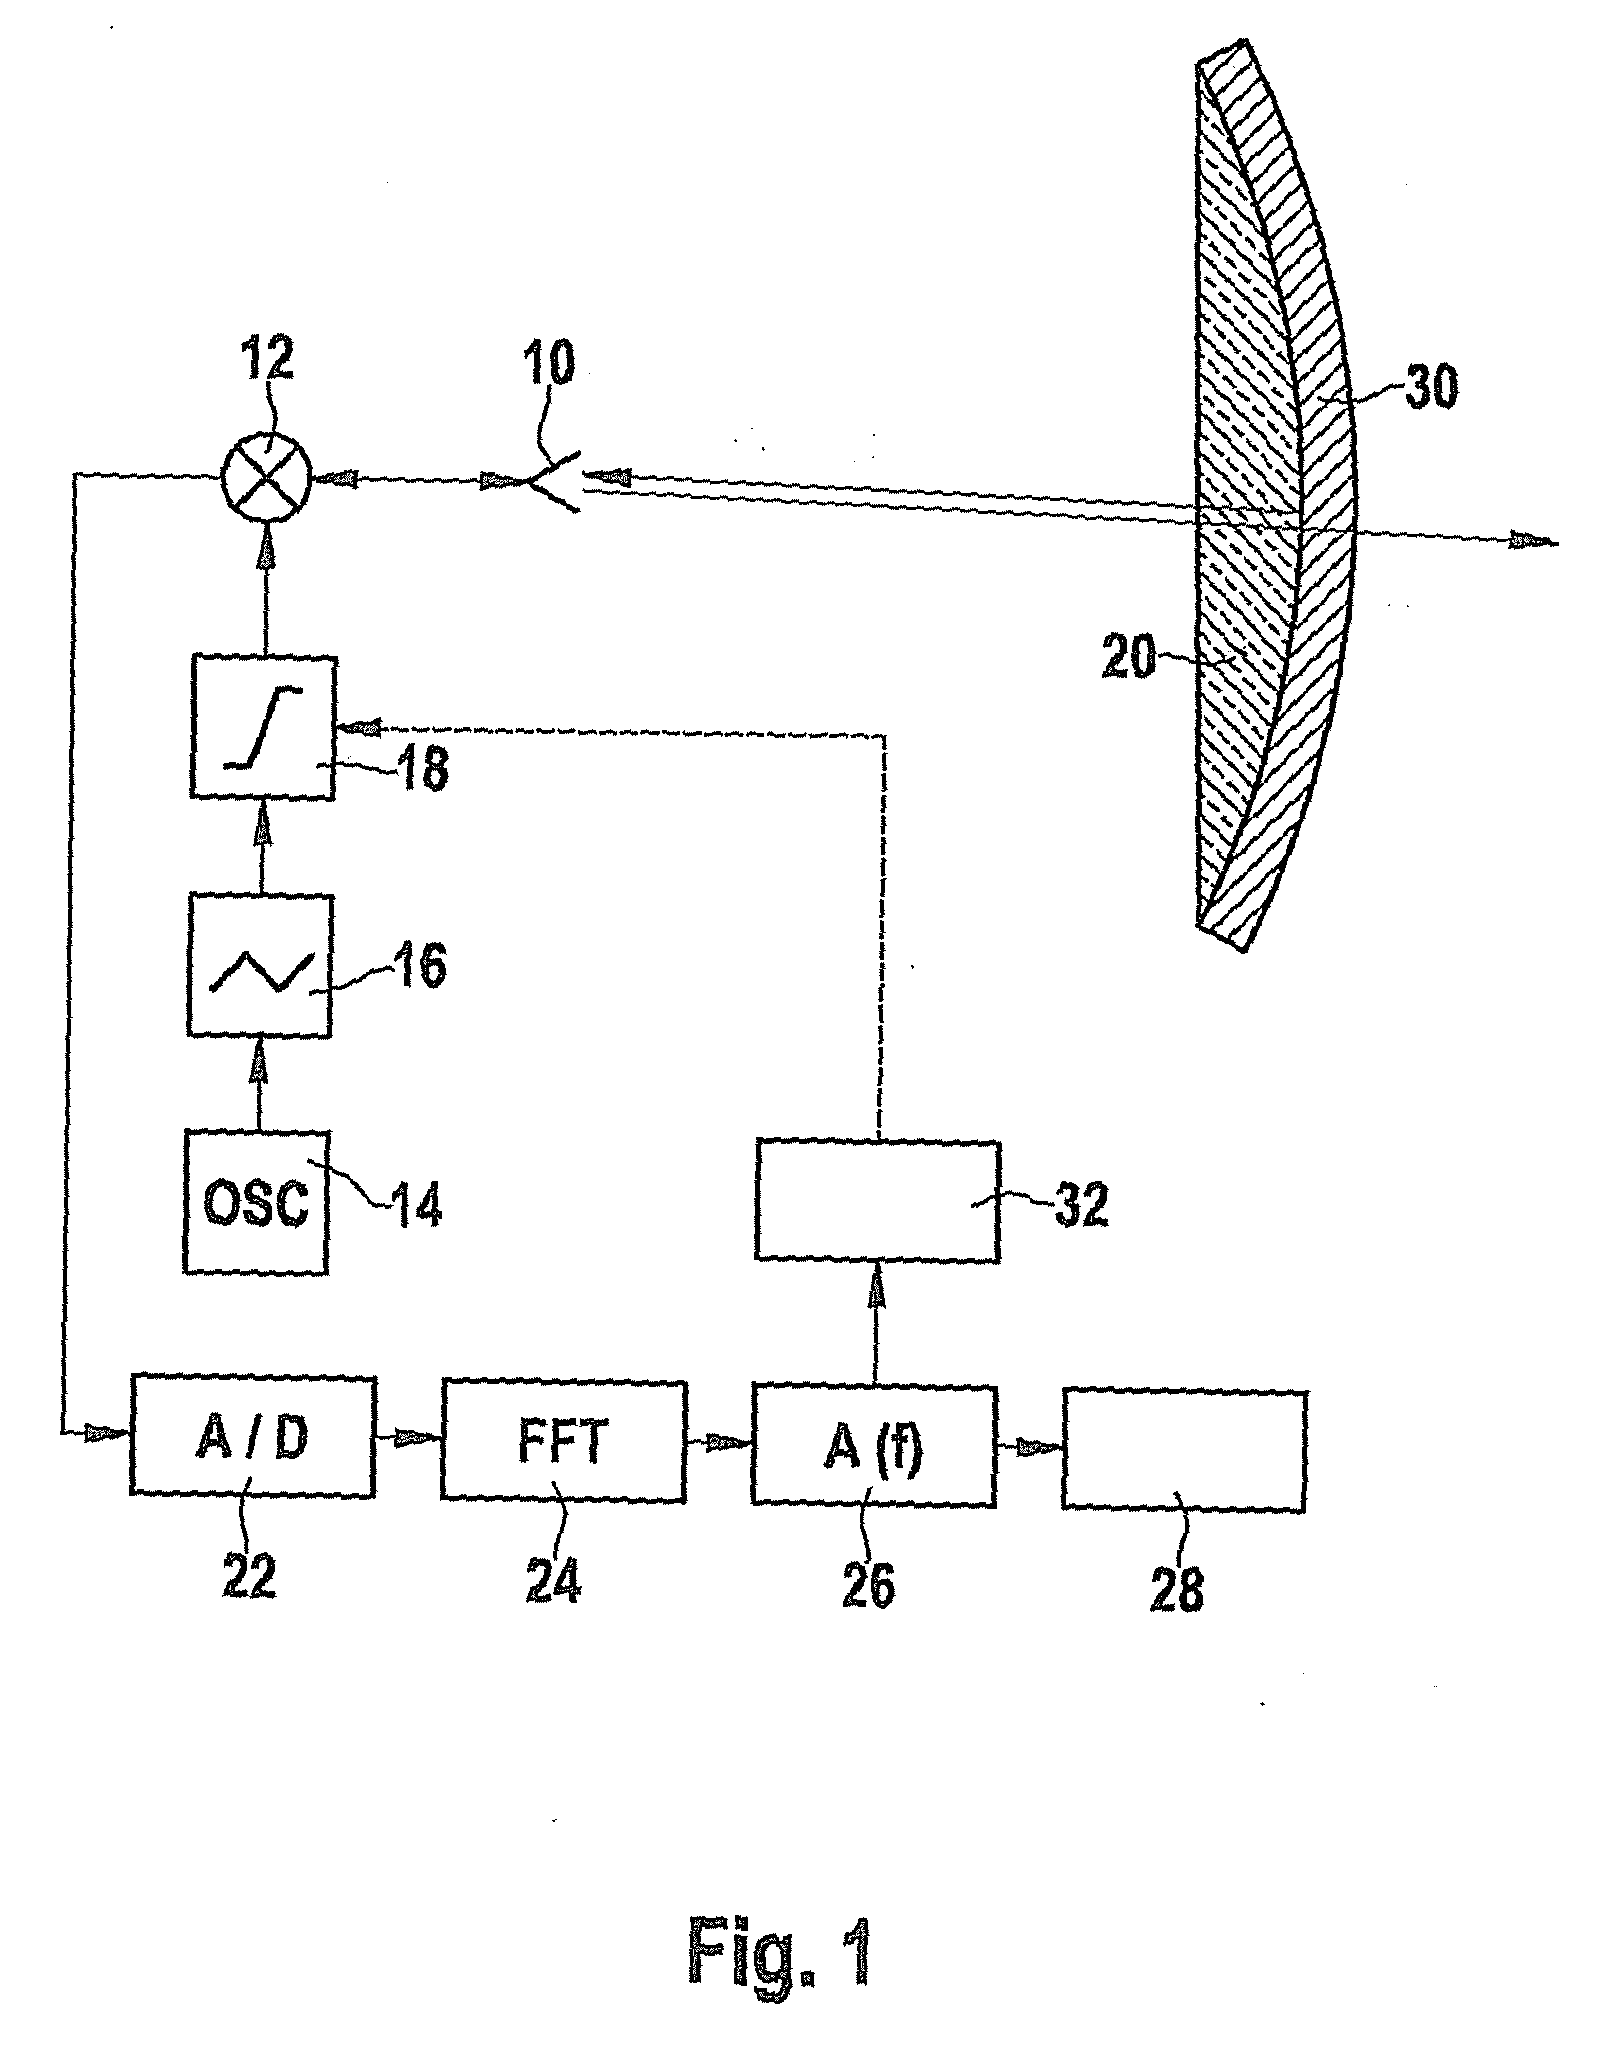 Method for detecting loss of sensitivity of an fmcw radar locating device by diffuse sources of loss